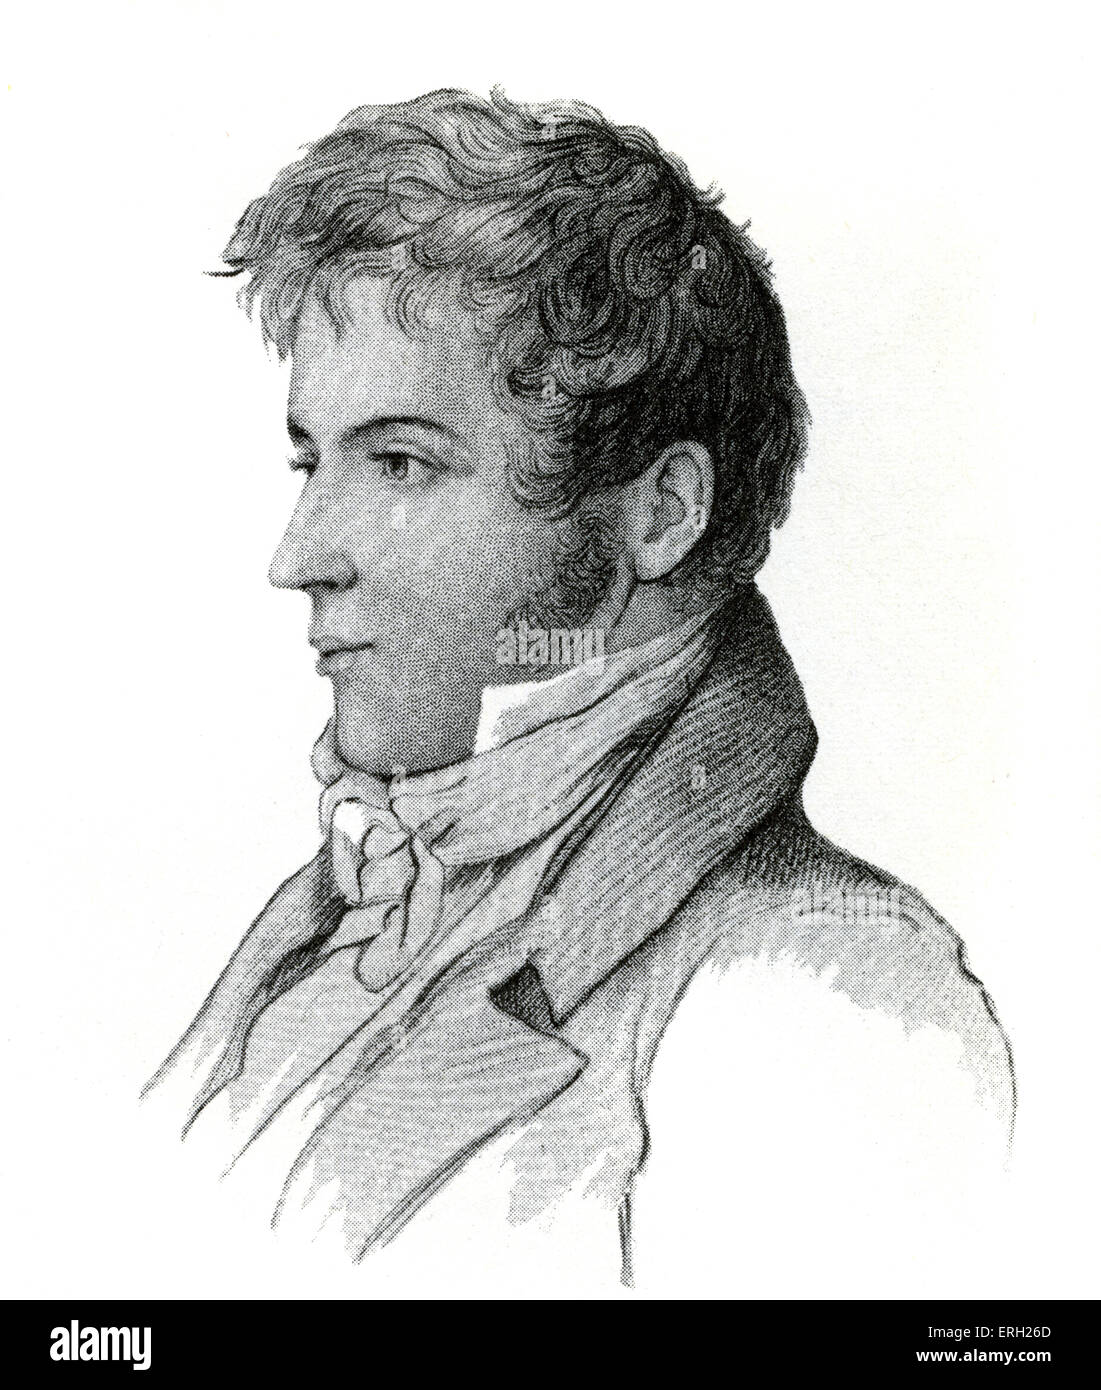 Washington Irving. Drawing by Vanderlyn in 1805. American author and historian: 3 April 1783 – 28 November 1859 Stock Photo